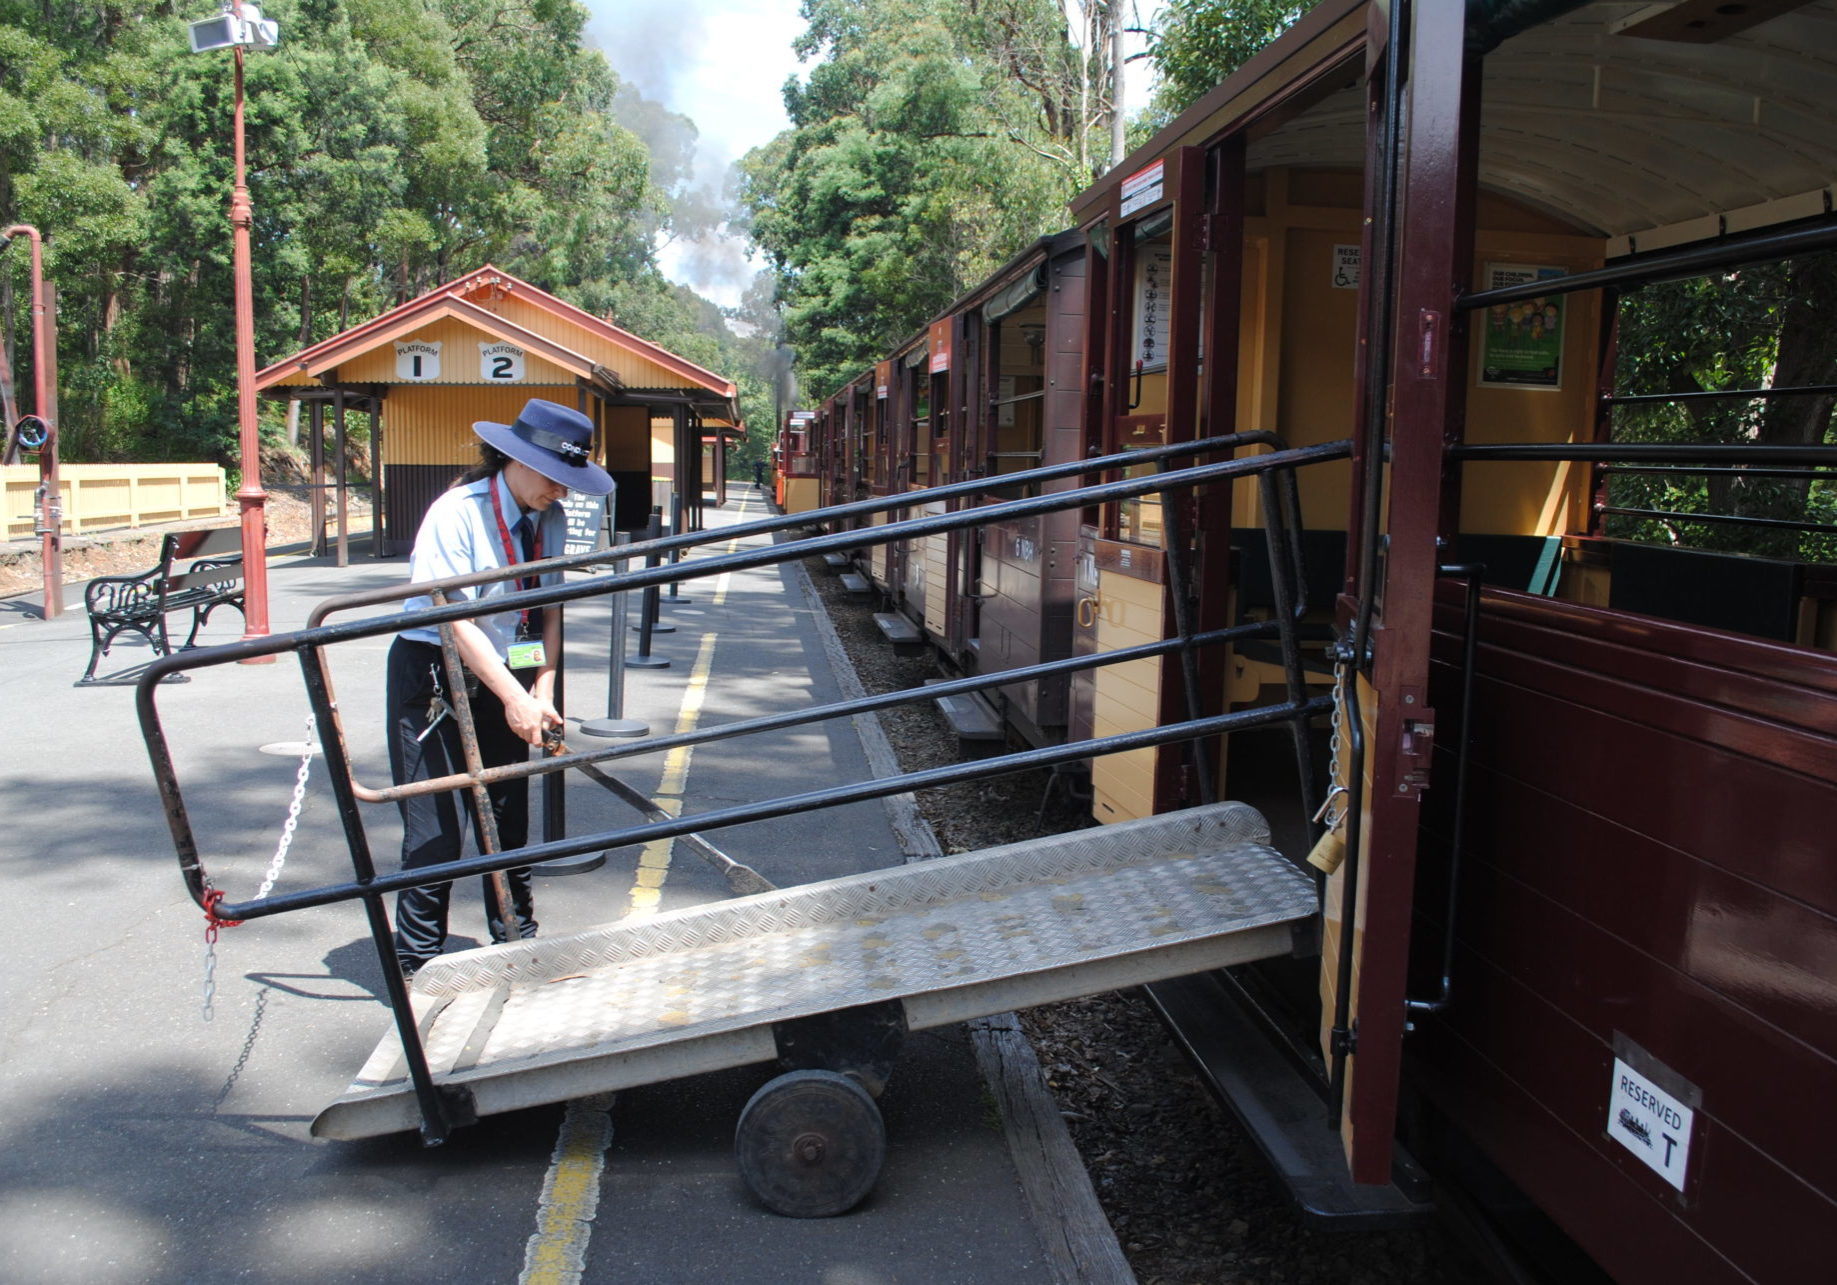 A ramp is attached to one of Puffing Billy's accessible carriages with open doors. A Puffing Billy volunteer can be seen operating the ramp to put it in place.